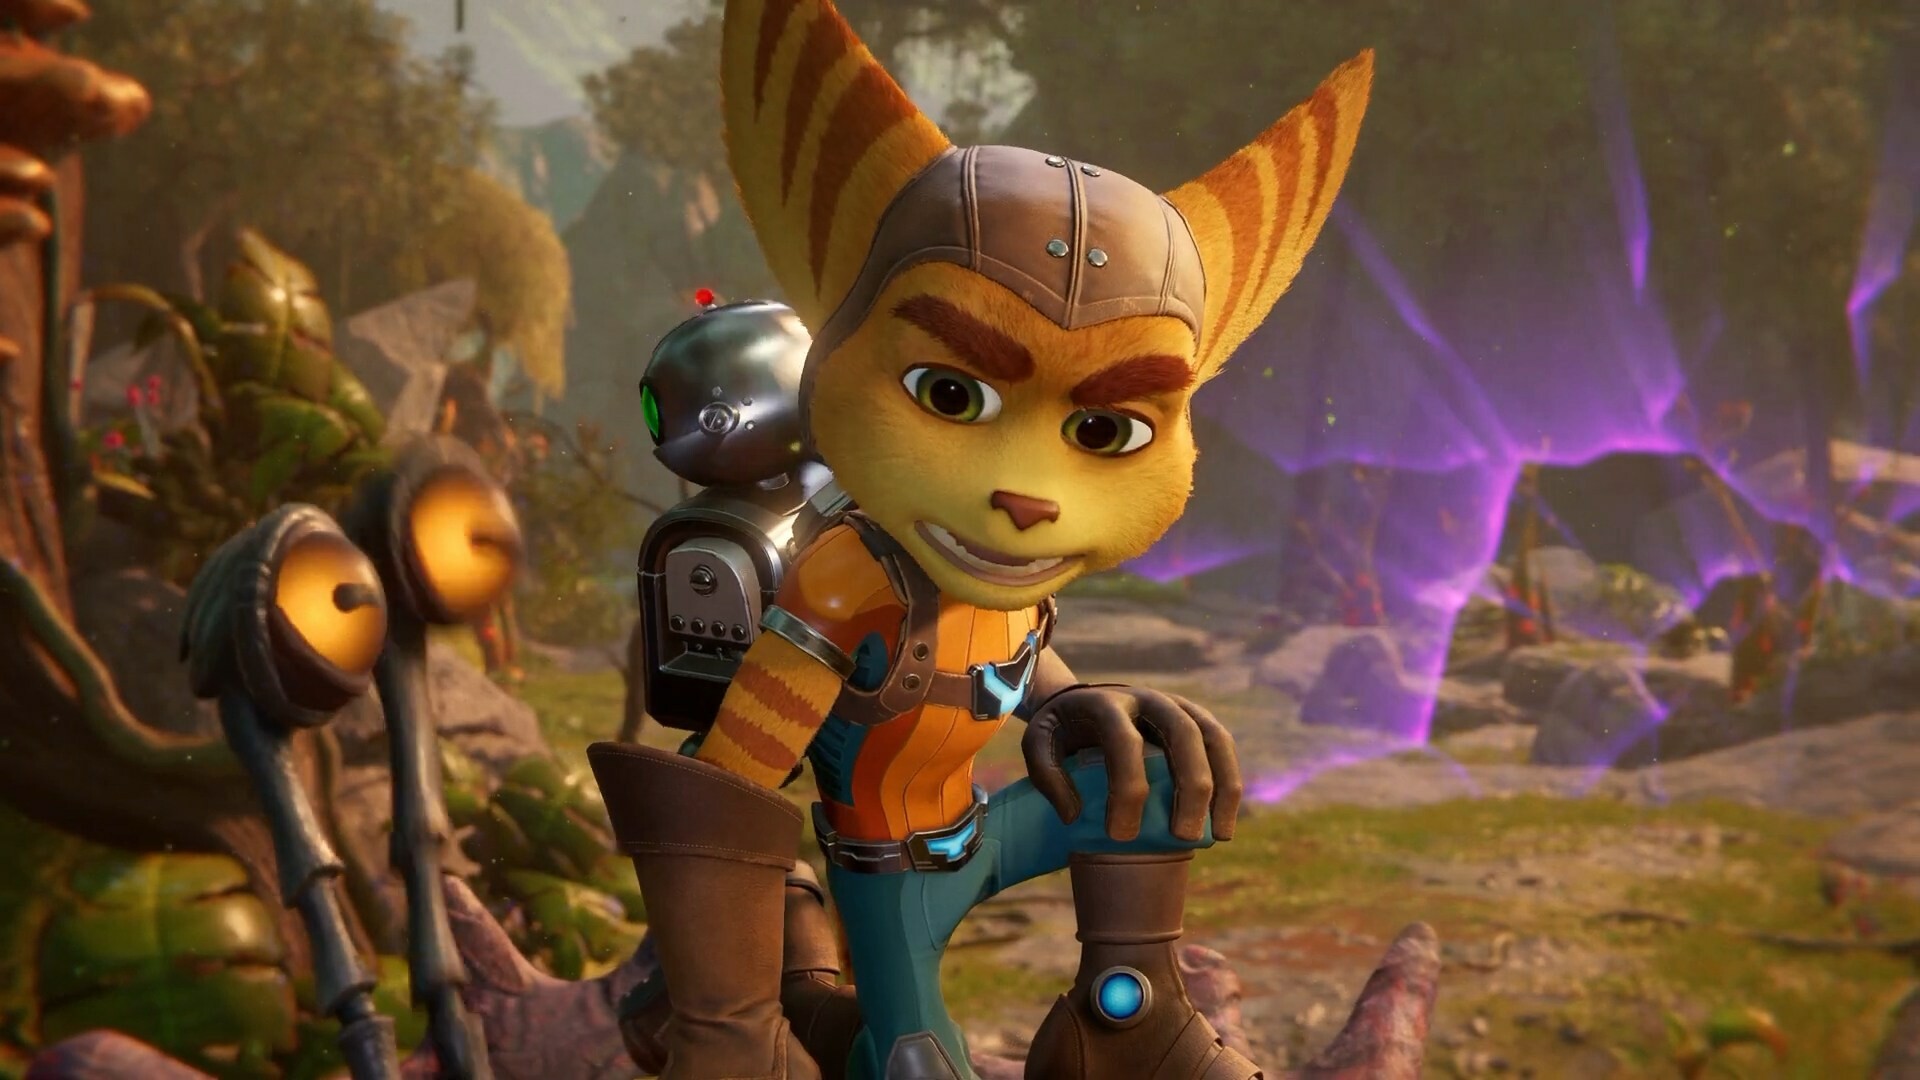 Ratchet and Clank: Rift Apart: An anthropomorphic character, Born on the Lombax home-world of Planet Fastoon. 1920x1080 Full HD Wallpaper.